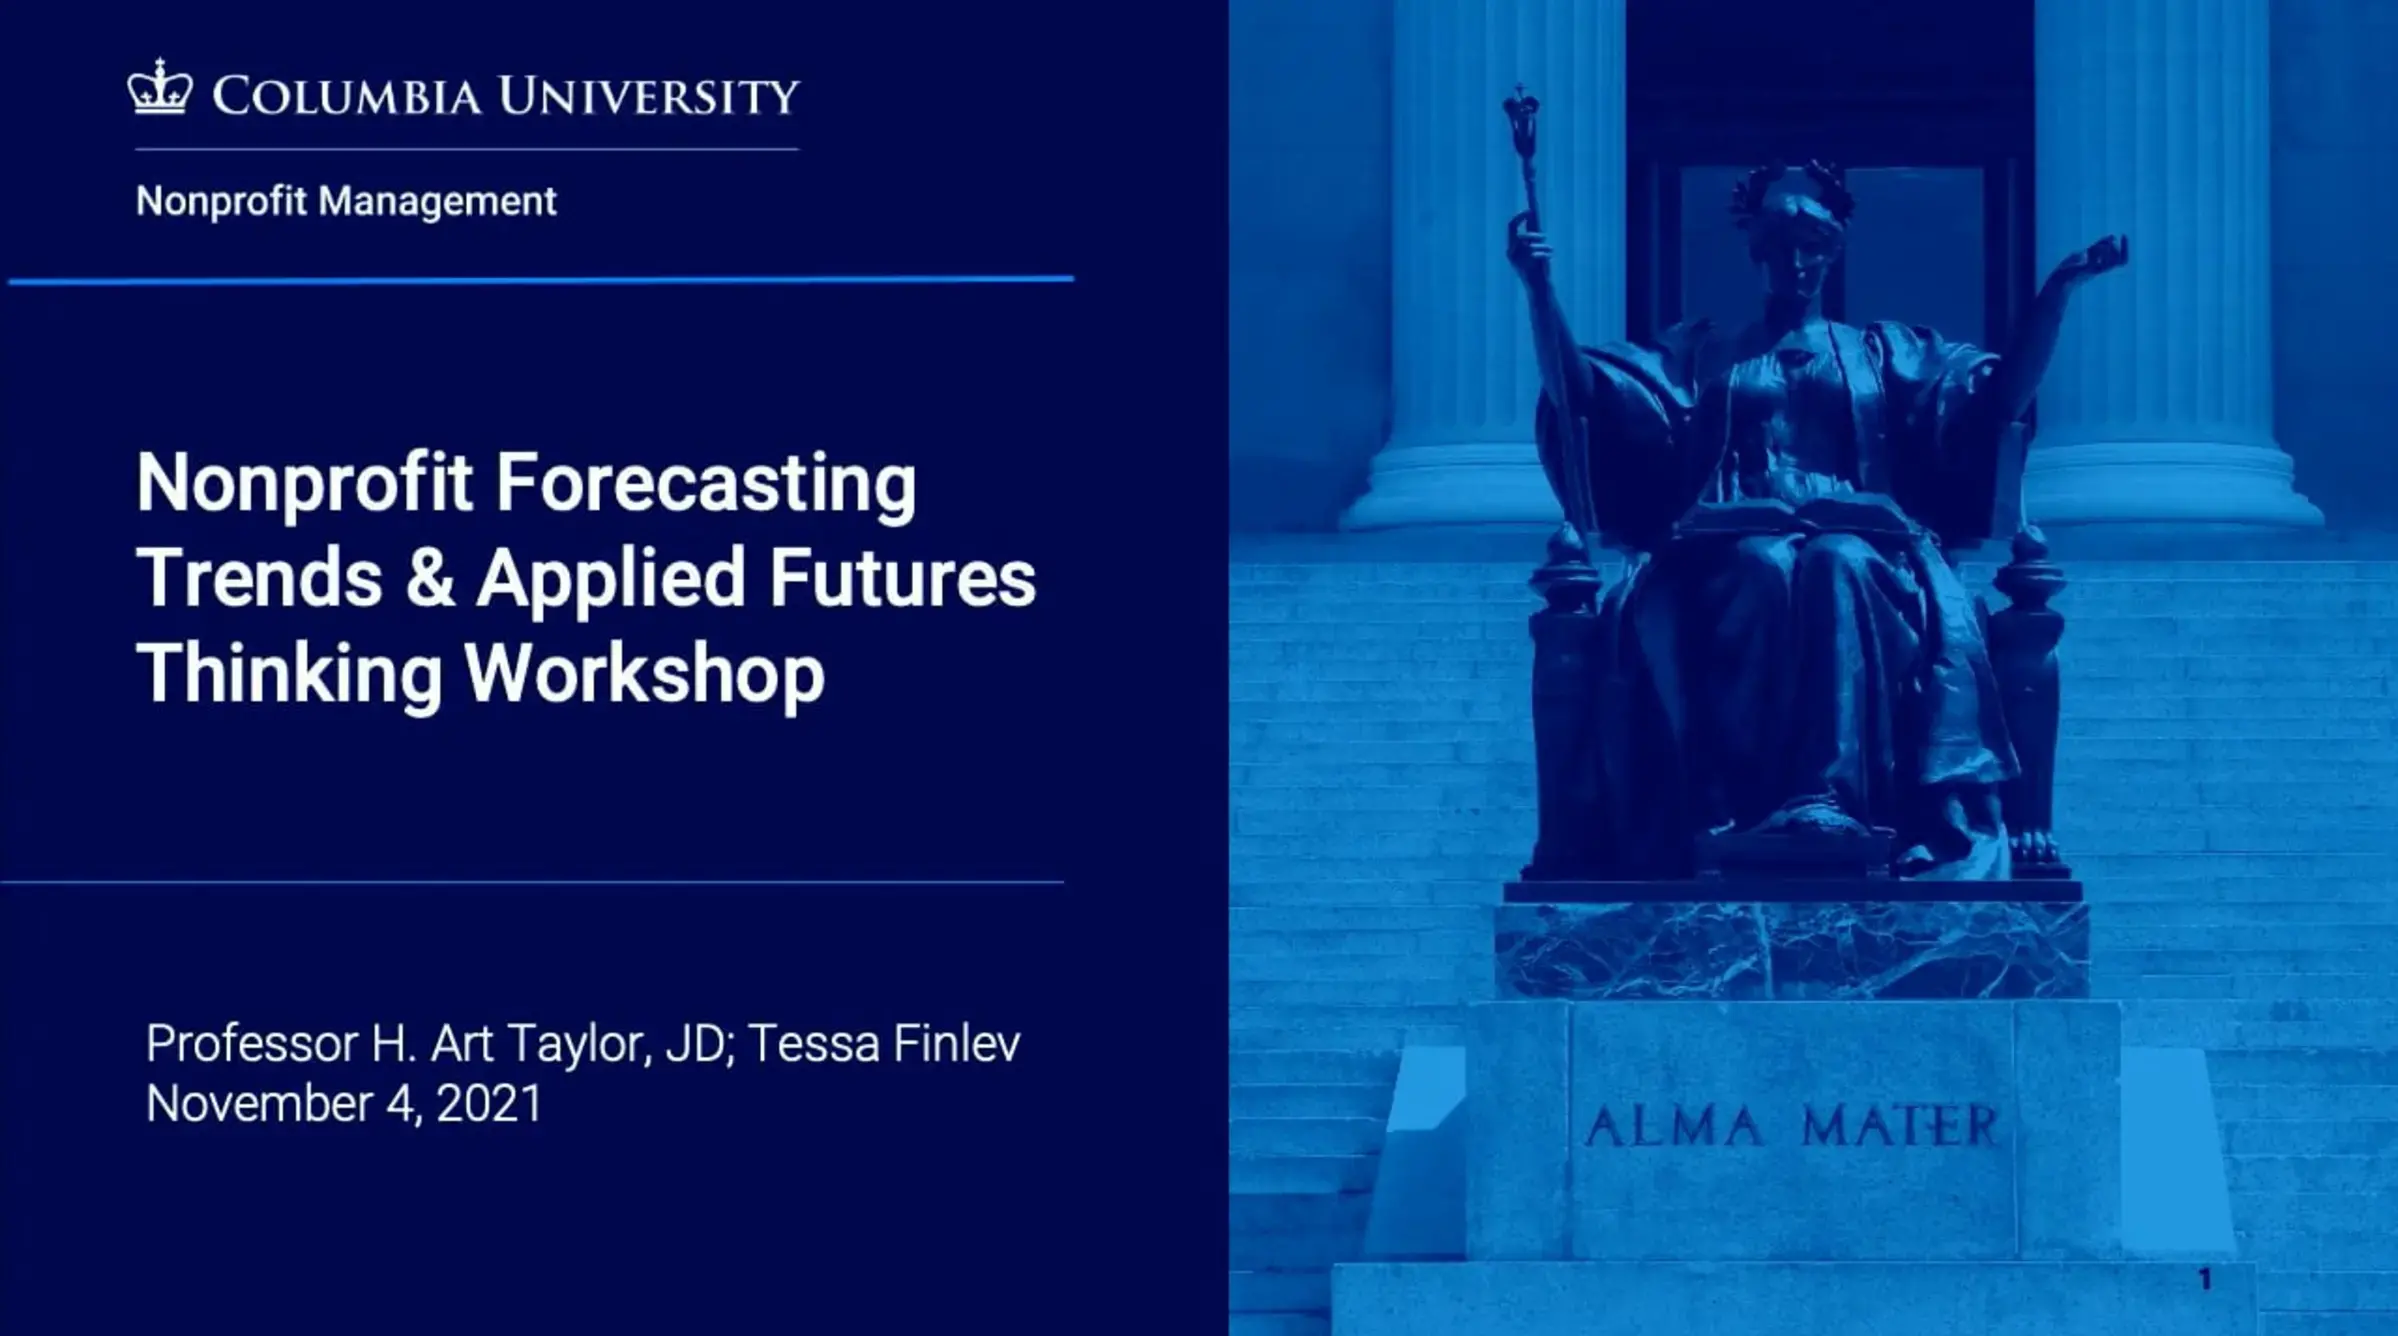 Nonprofit Forecasting and Applied Futures Workshop